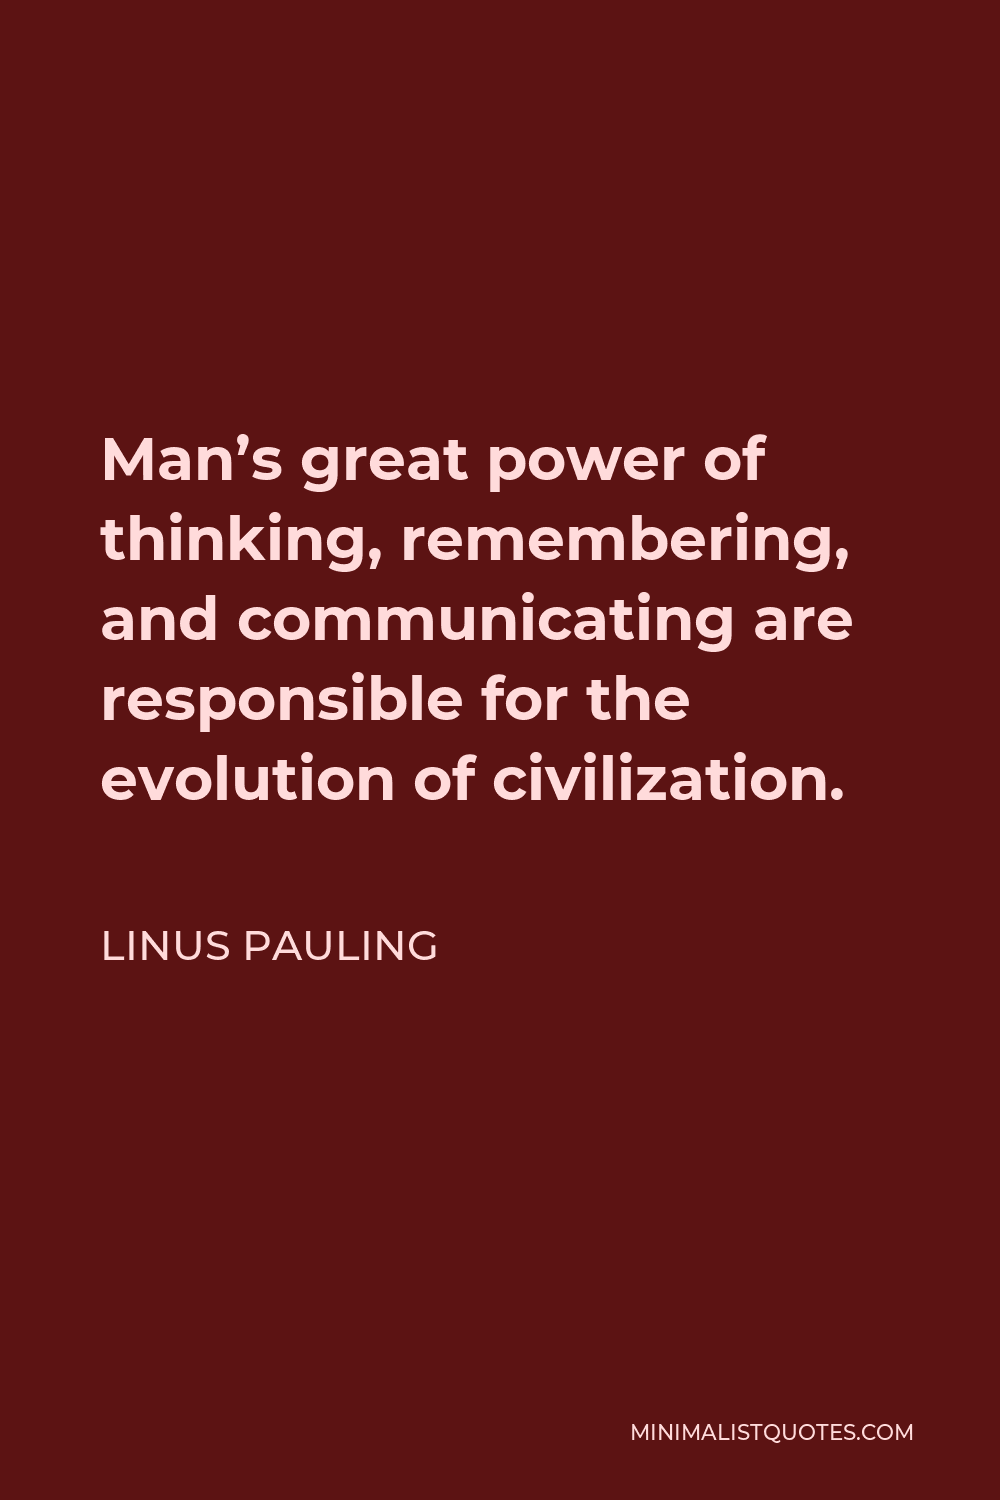 Linus Pauling Quote - Man’s great power of thinking, remembering, and communicating are responsible for the evolution of civilization.